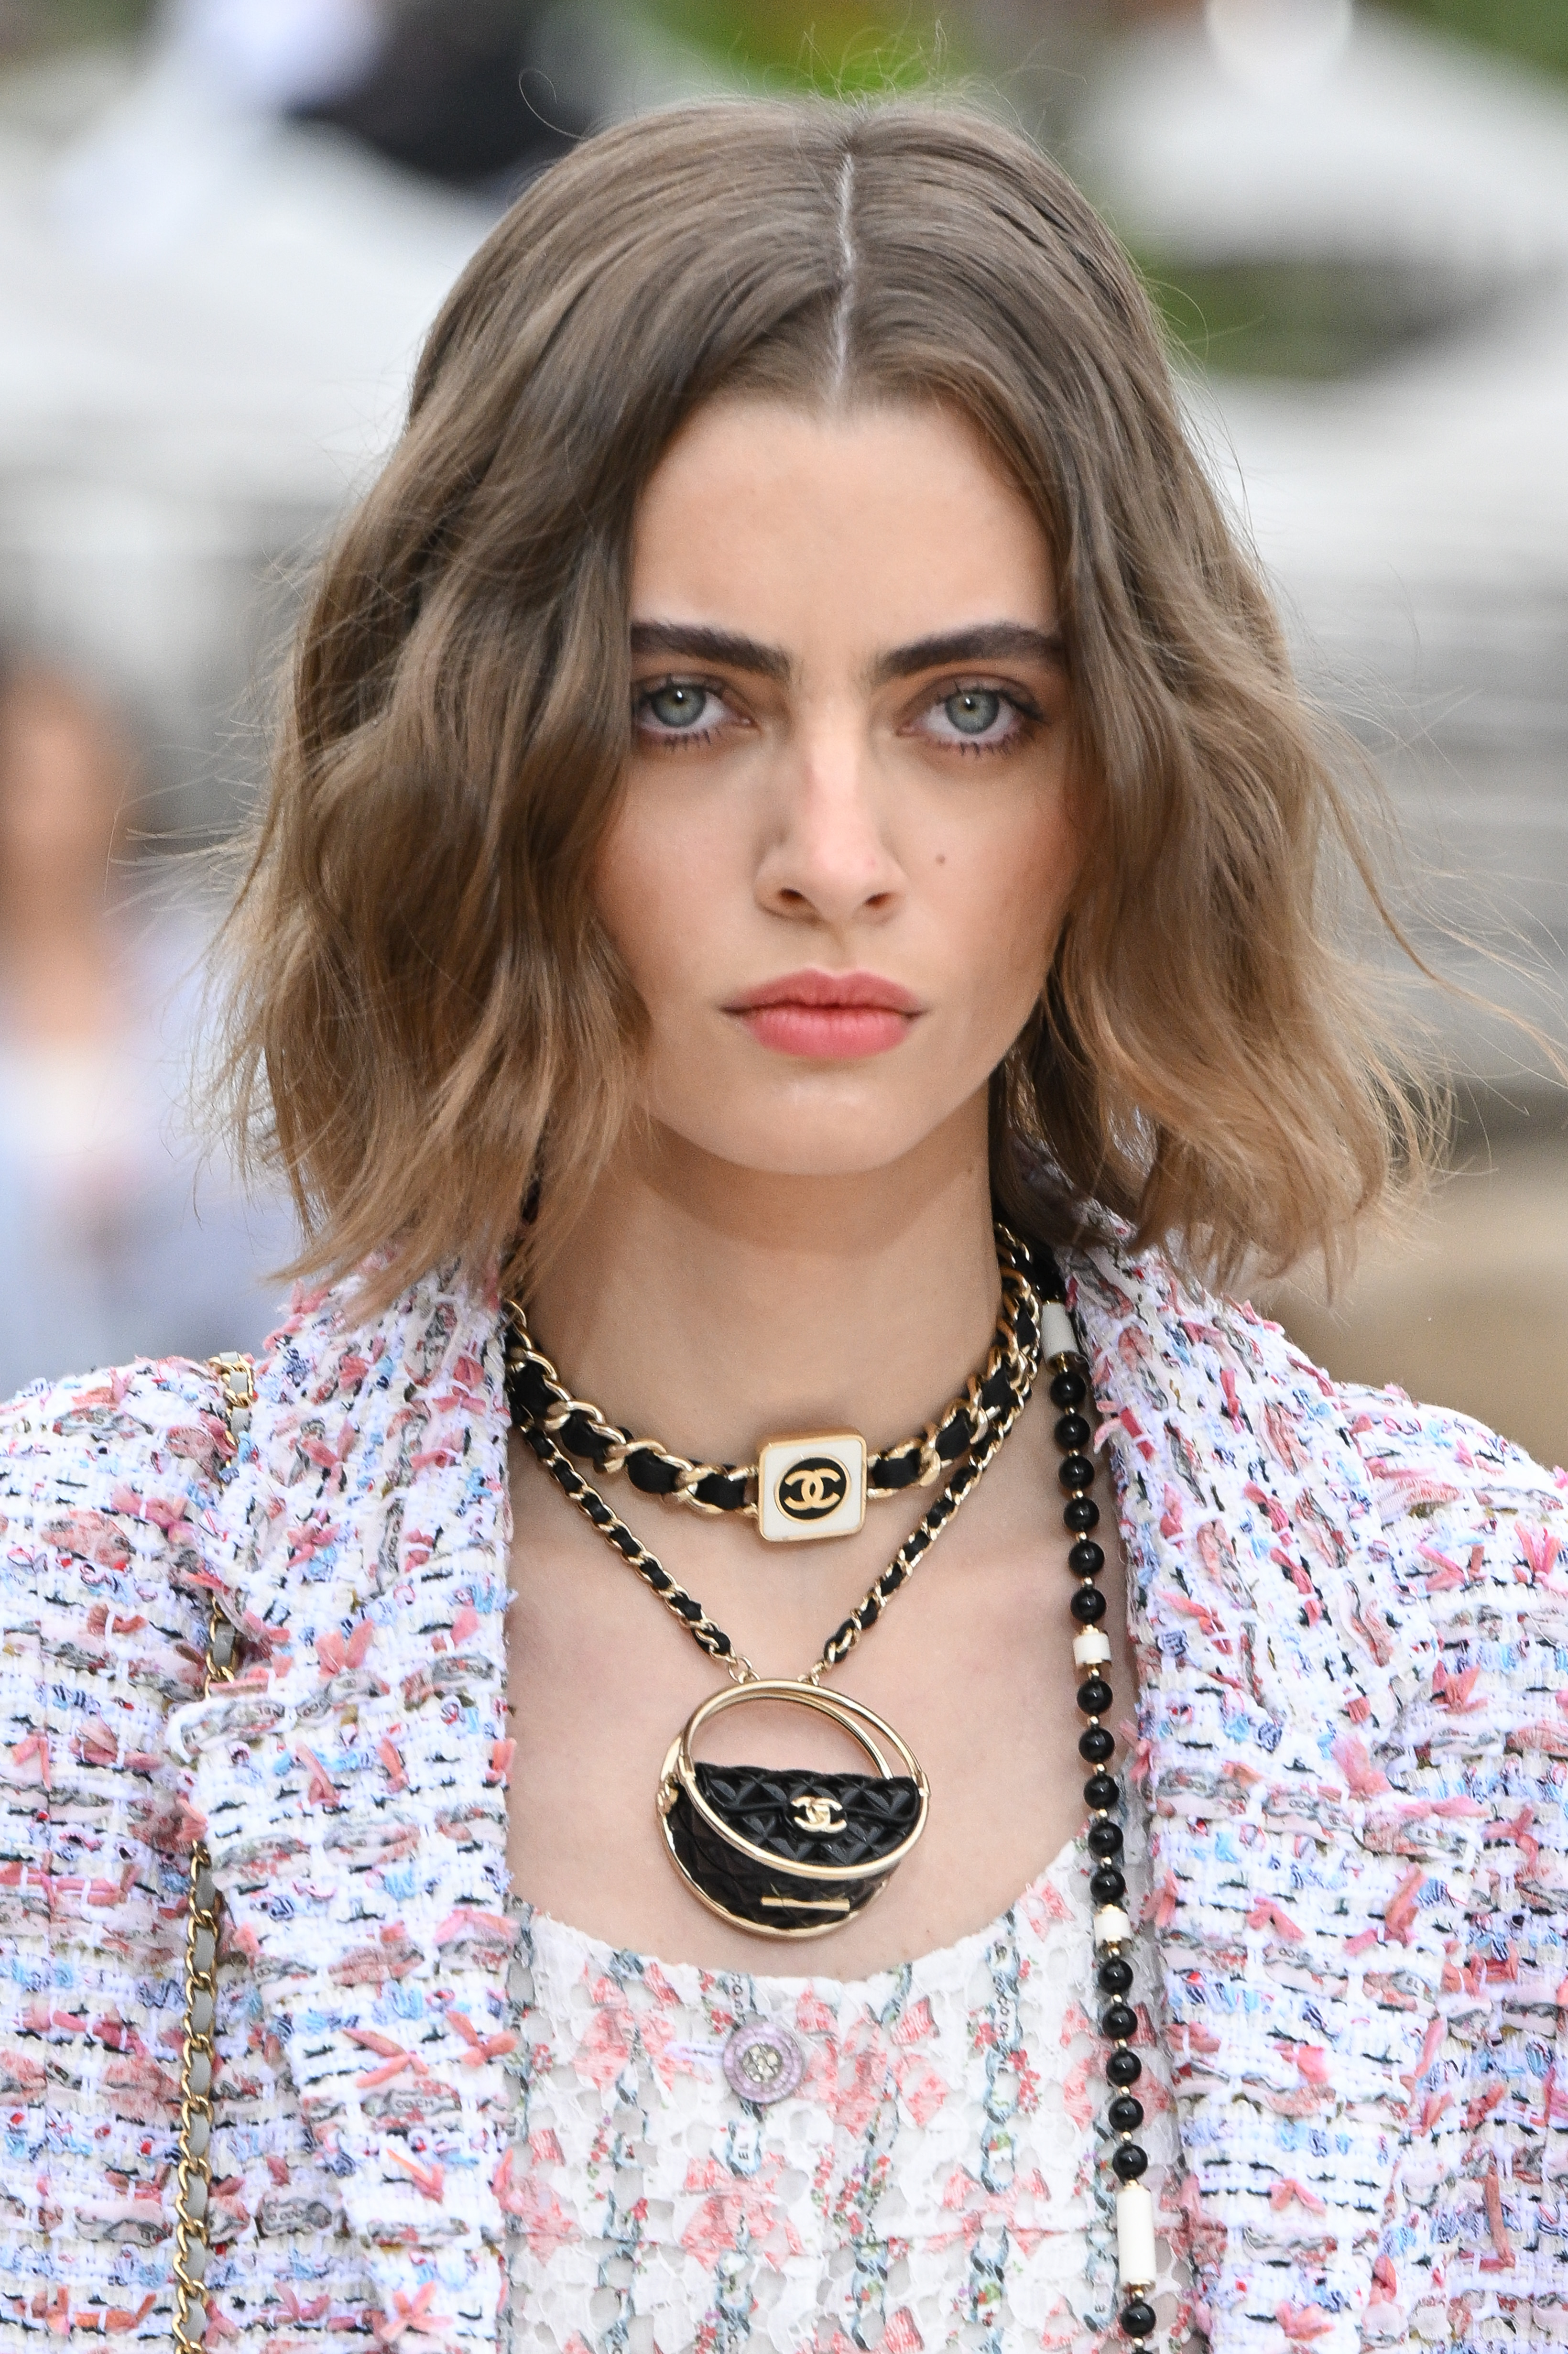 Chanel Cruise 2023 Brings Racer Chic to Monaco: See the Best Looks